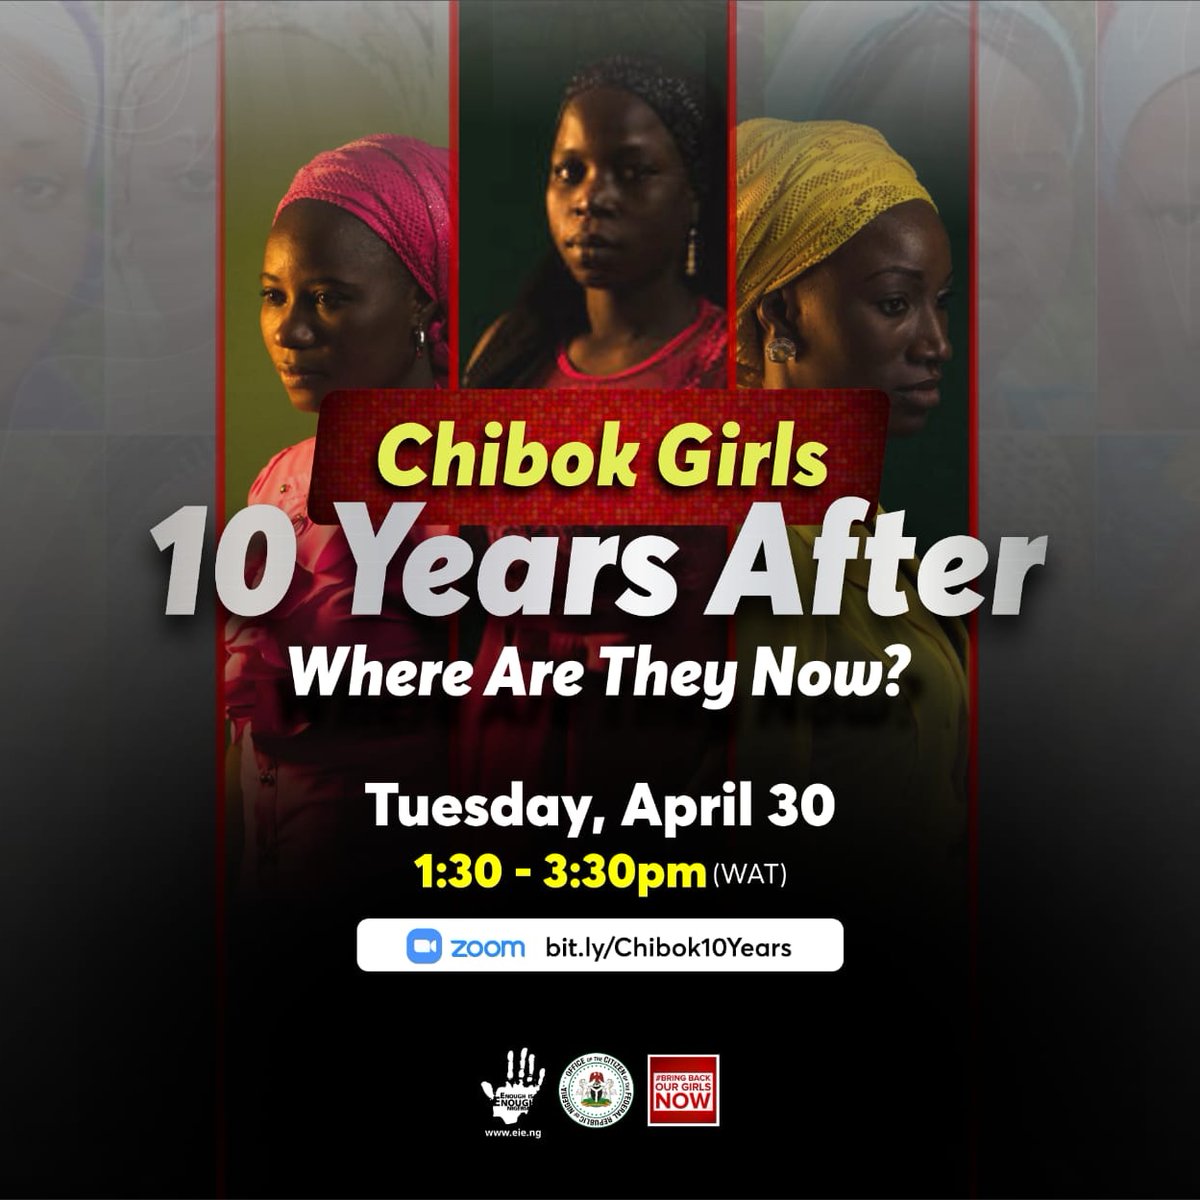 10 years after, where are they? Hear the courageous stories of survival from #ChibokGirls like Patience, Grace & Rebecca, rescued after years held by Boko Haram. The 90 still in captivity, their freedom must be won. 💔 ✊️ Tuesday, April 30 at 1:30pm | bit.ly/Chibok10Years